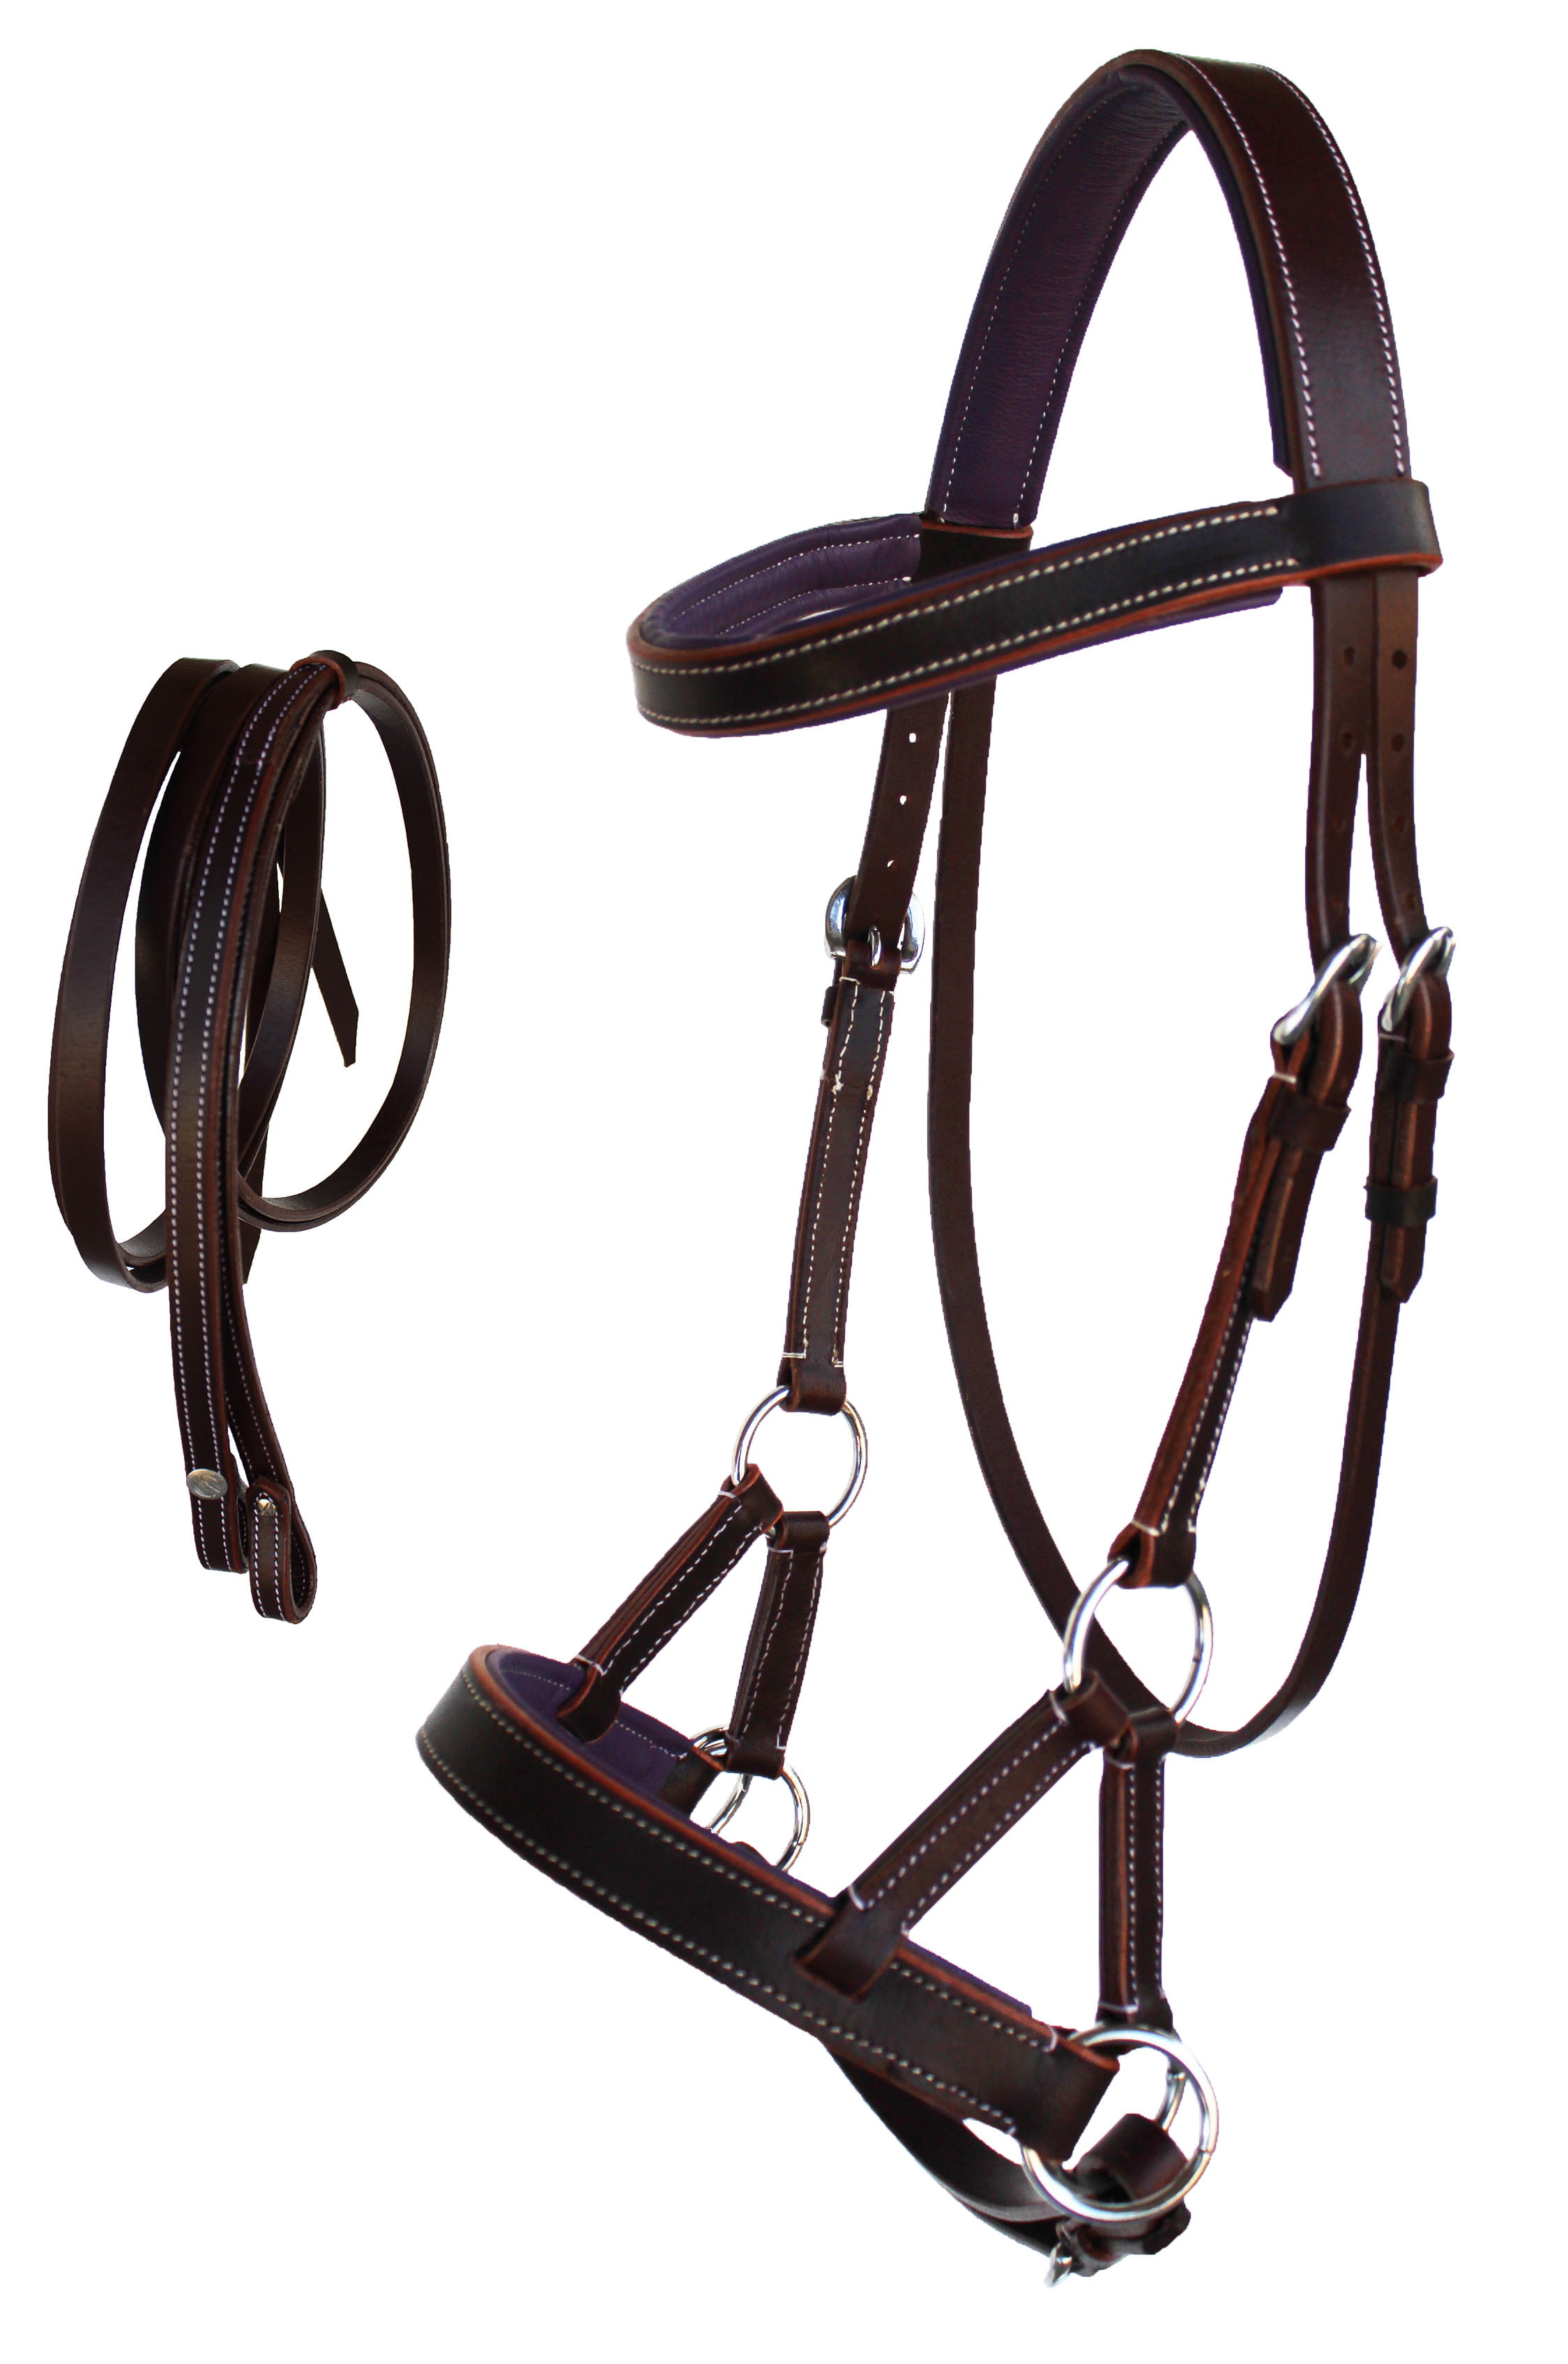 Yesrd Genuine Leather Quality Horse Bitless Bridle with Reins  Black & Brown 